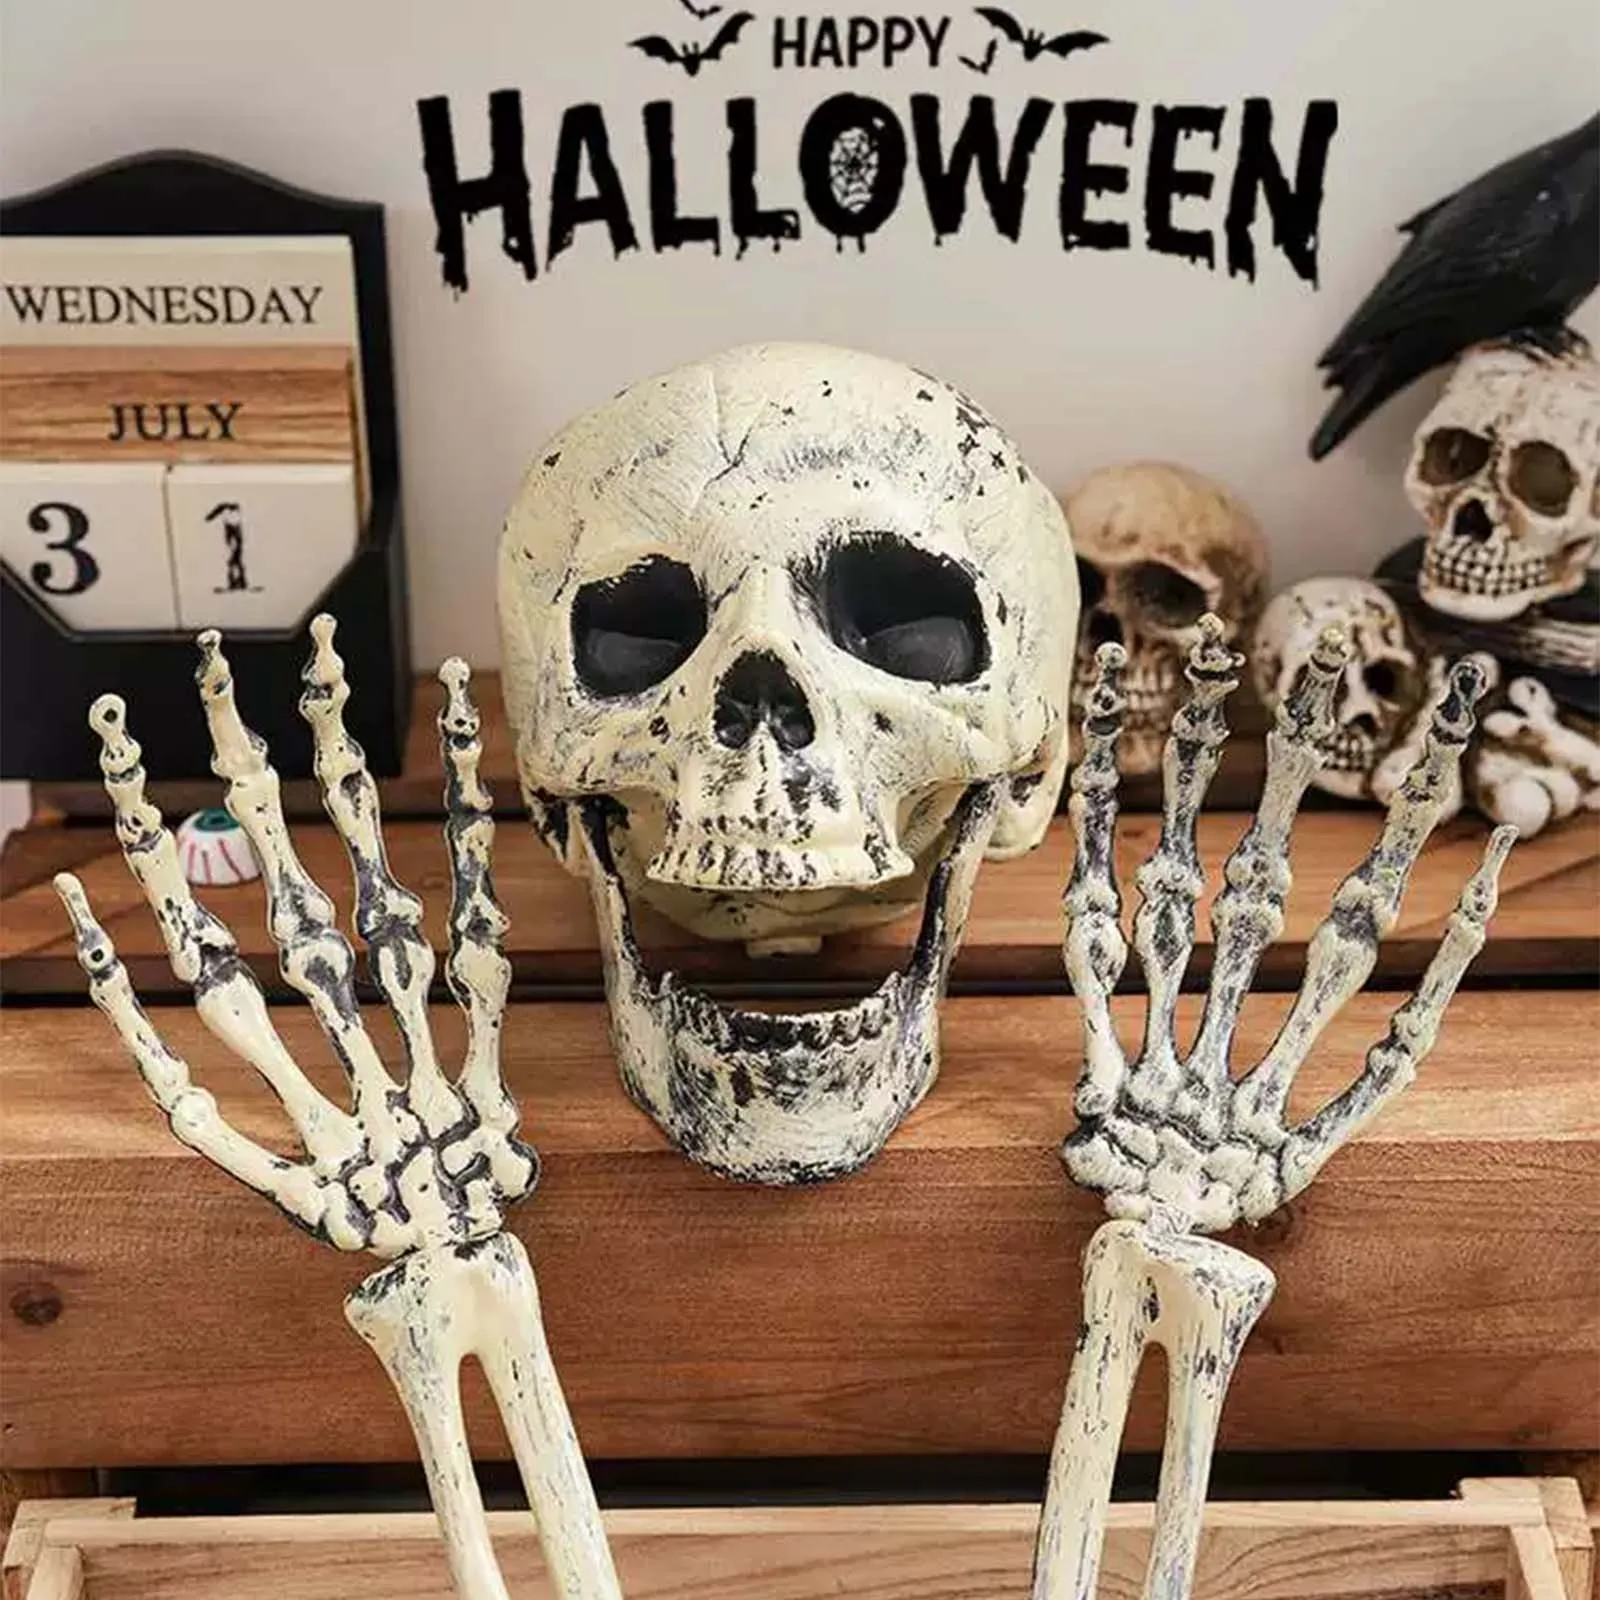 

Graduation Party Decorations 2022 Halloween Decoration Imitation Human Hands And Arms Insertion House Secret Room Bar Skeleton